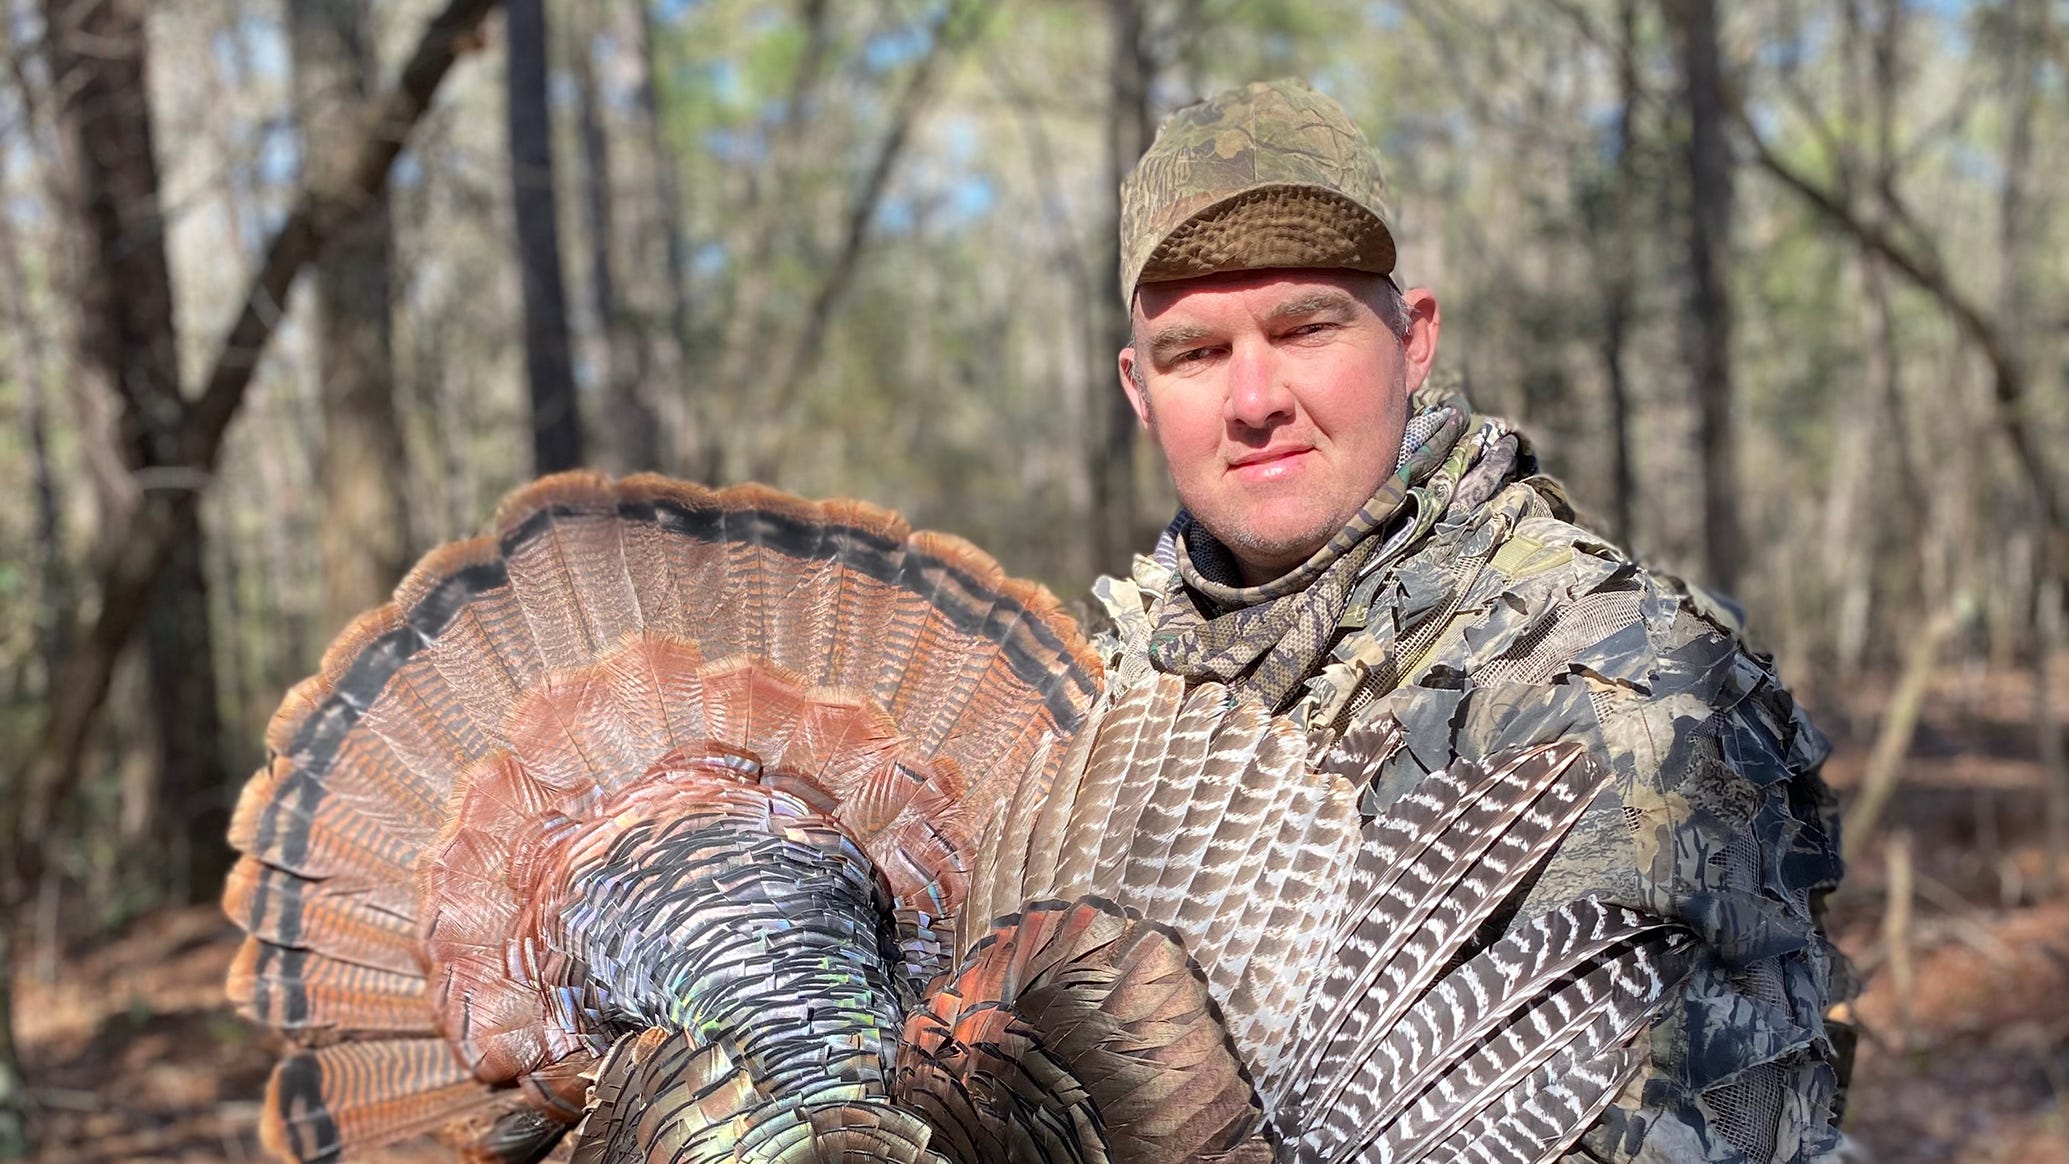 Mississippi turkey hunting limit proposed for nonresident hunters